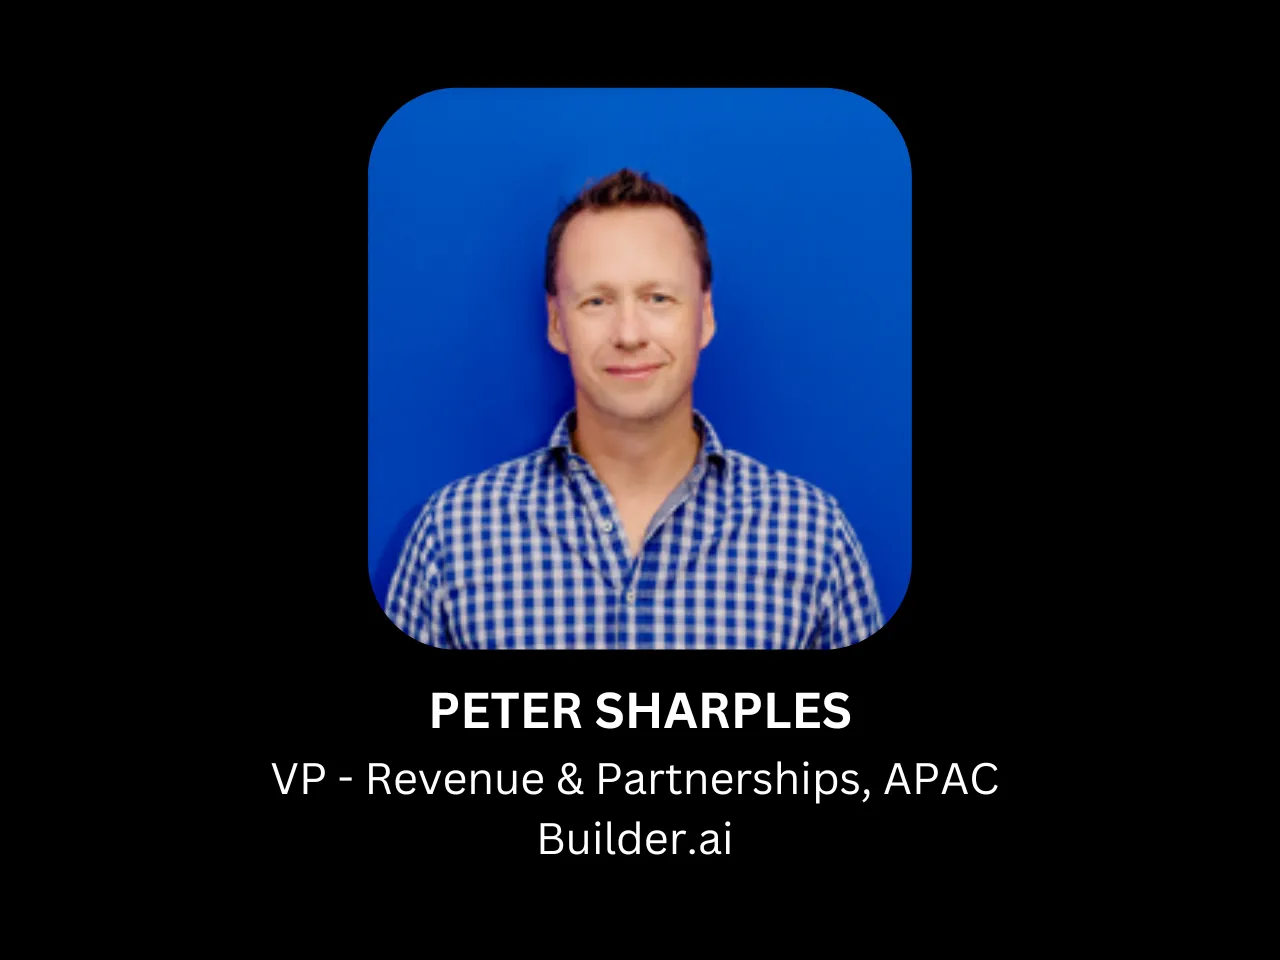 Builder.ai onboards Peter Sharples as New VP of Revenue and Partnerships for APAC